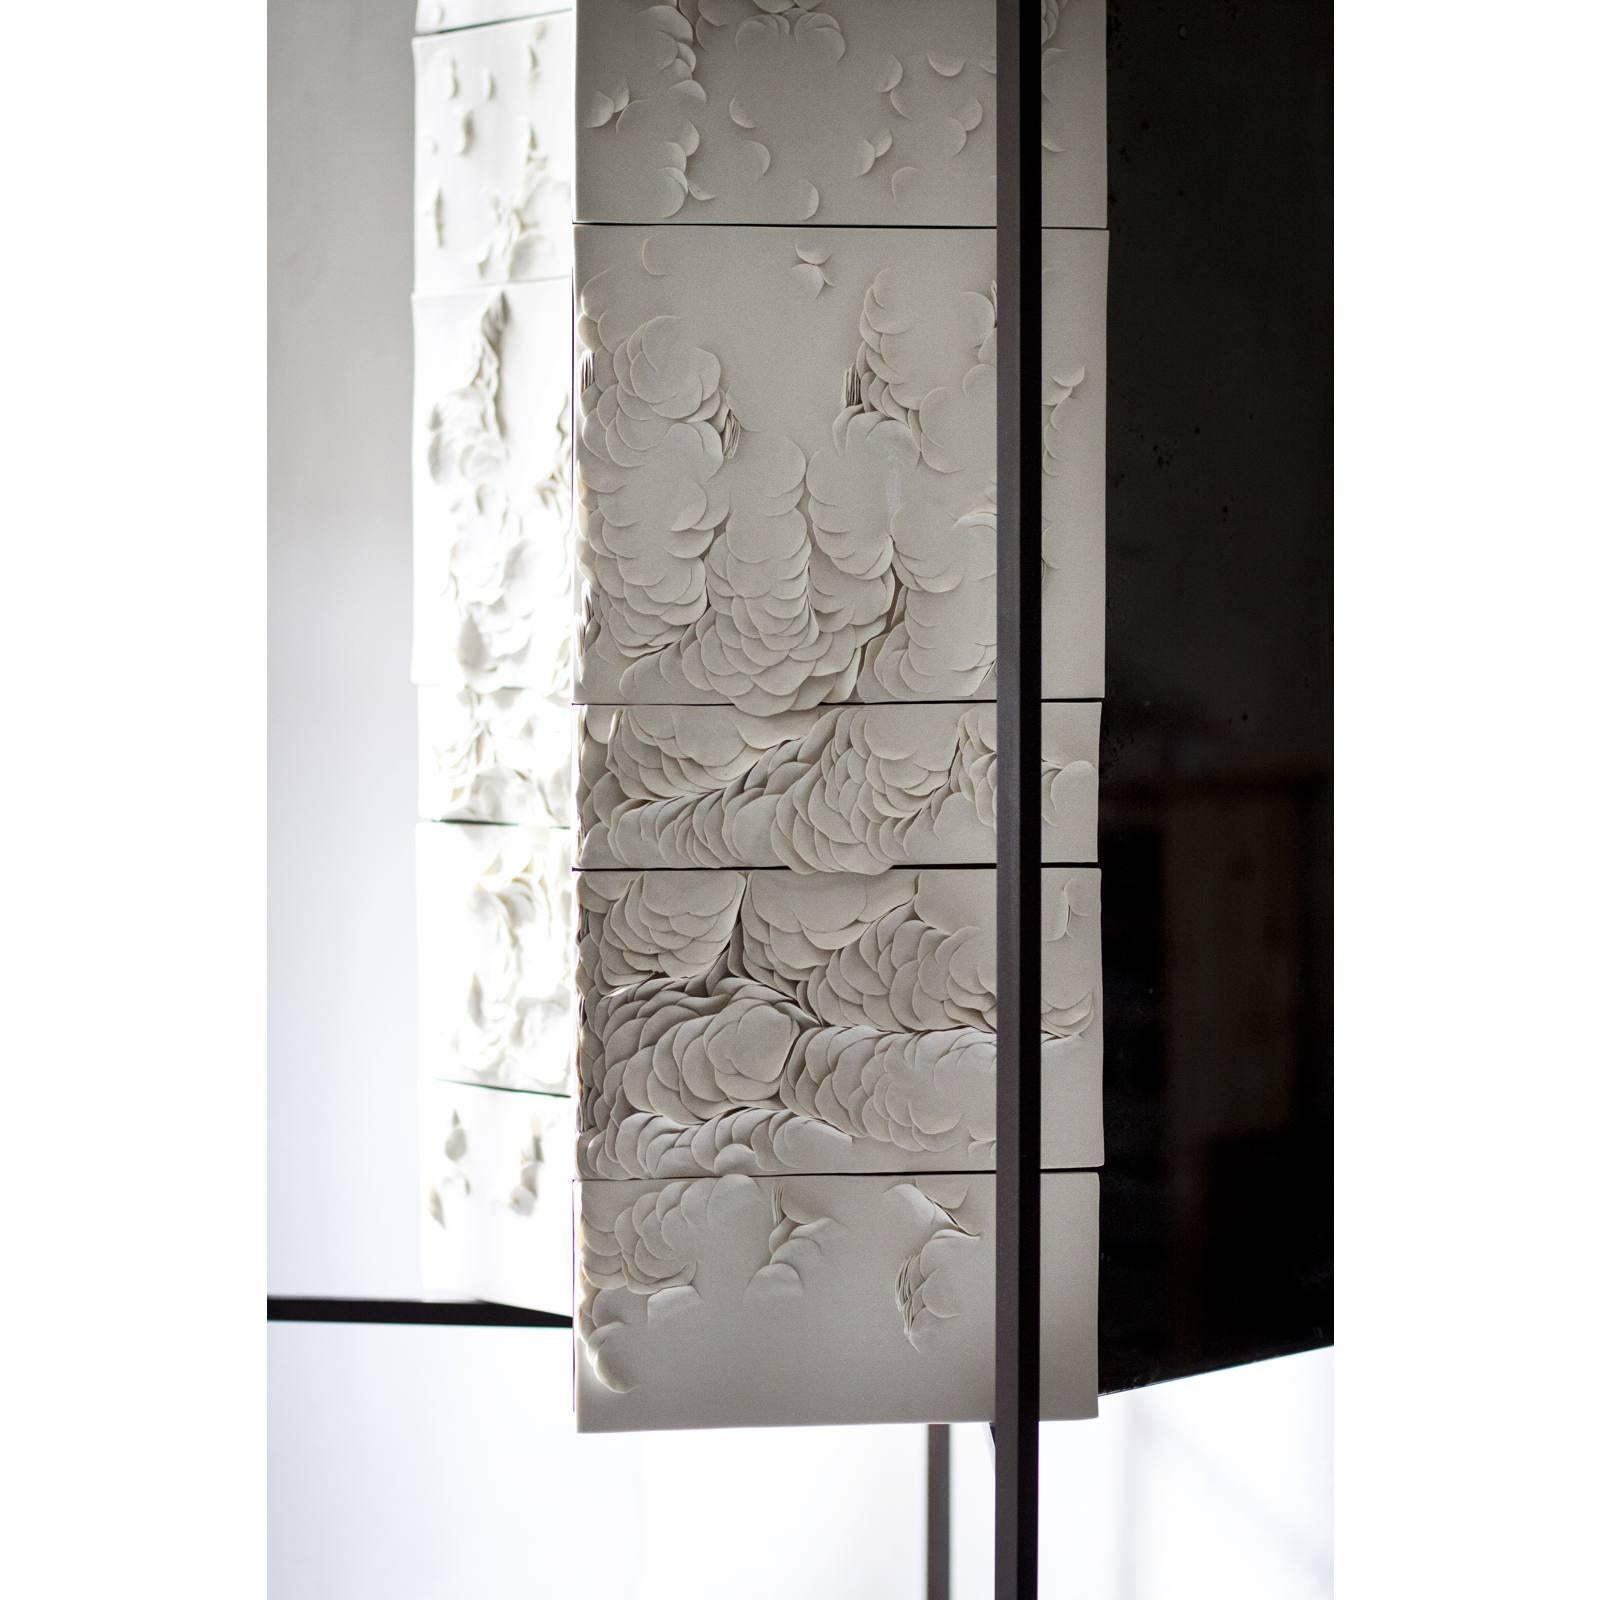 Contemporary Queer 3 Cabinet in Procelain by Unduo and Biancodichina